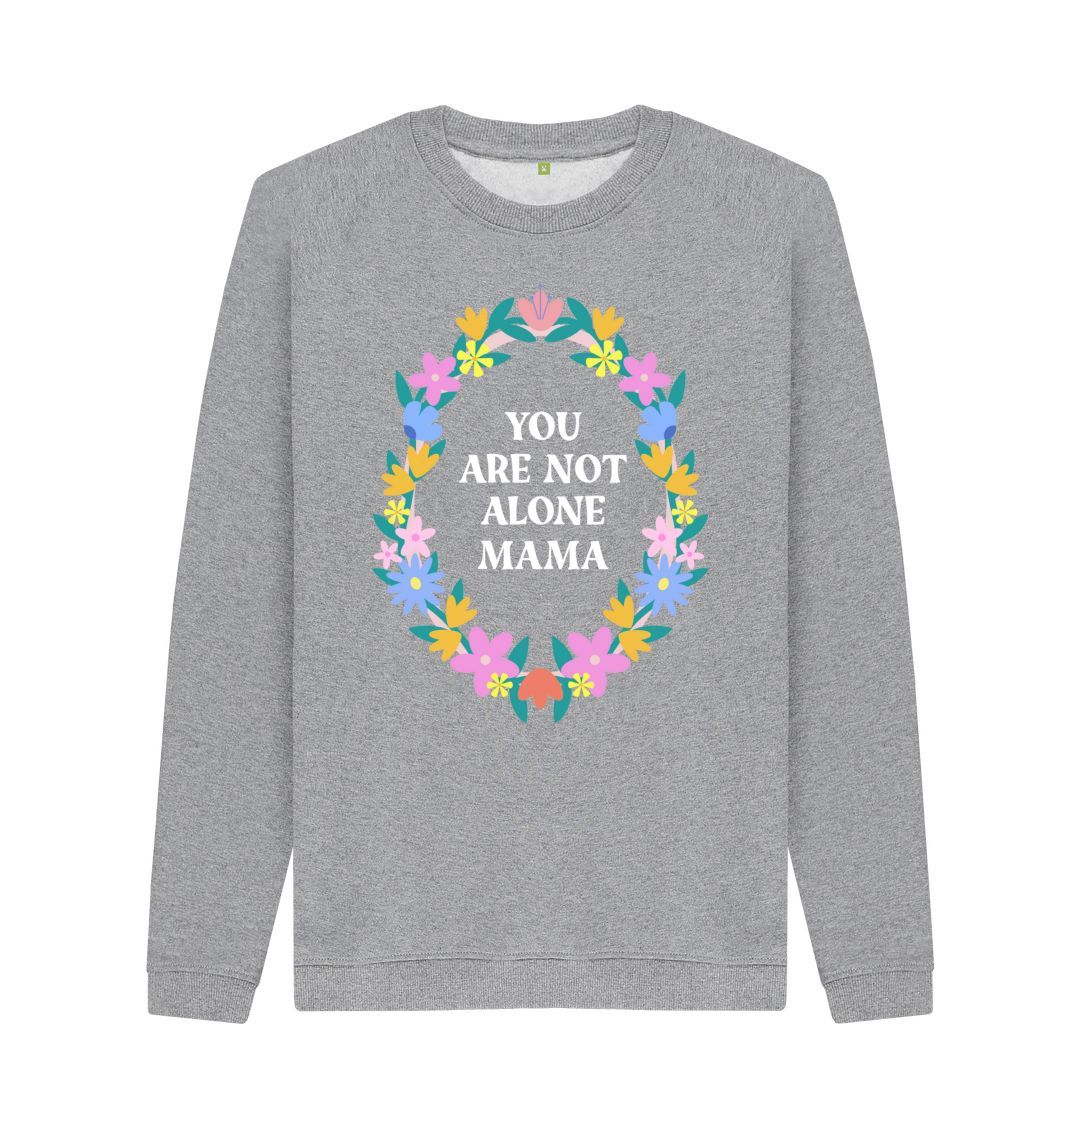 Black You Are Not Alone Mama Sweater - Black